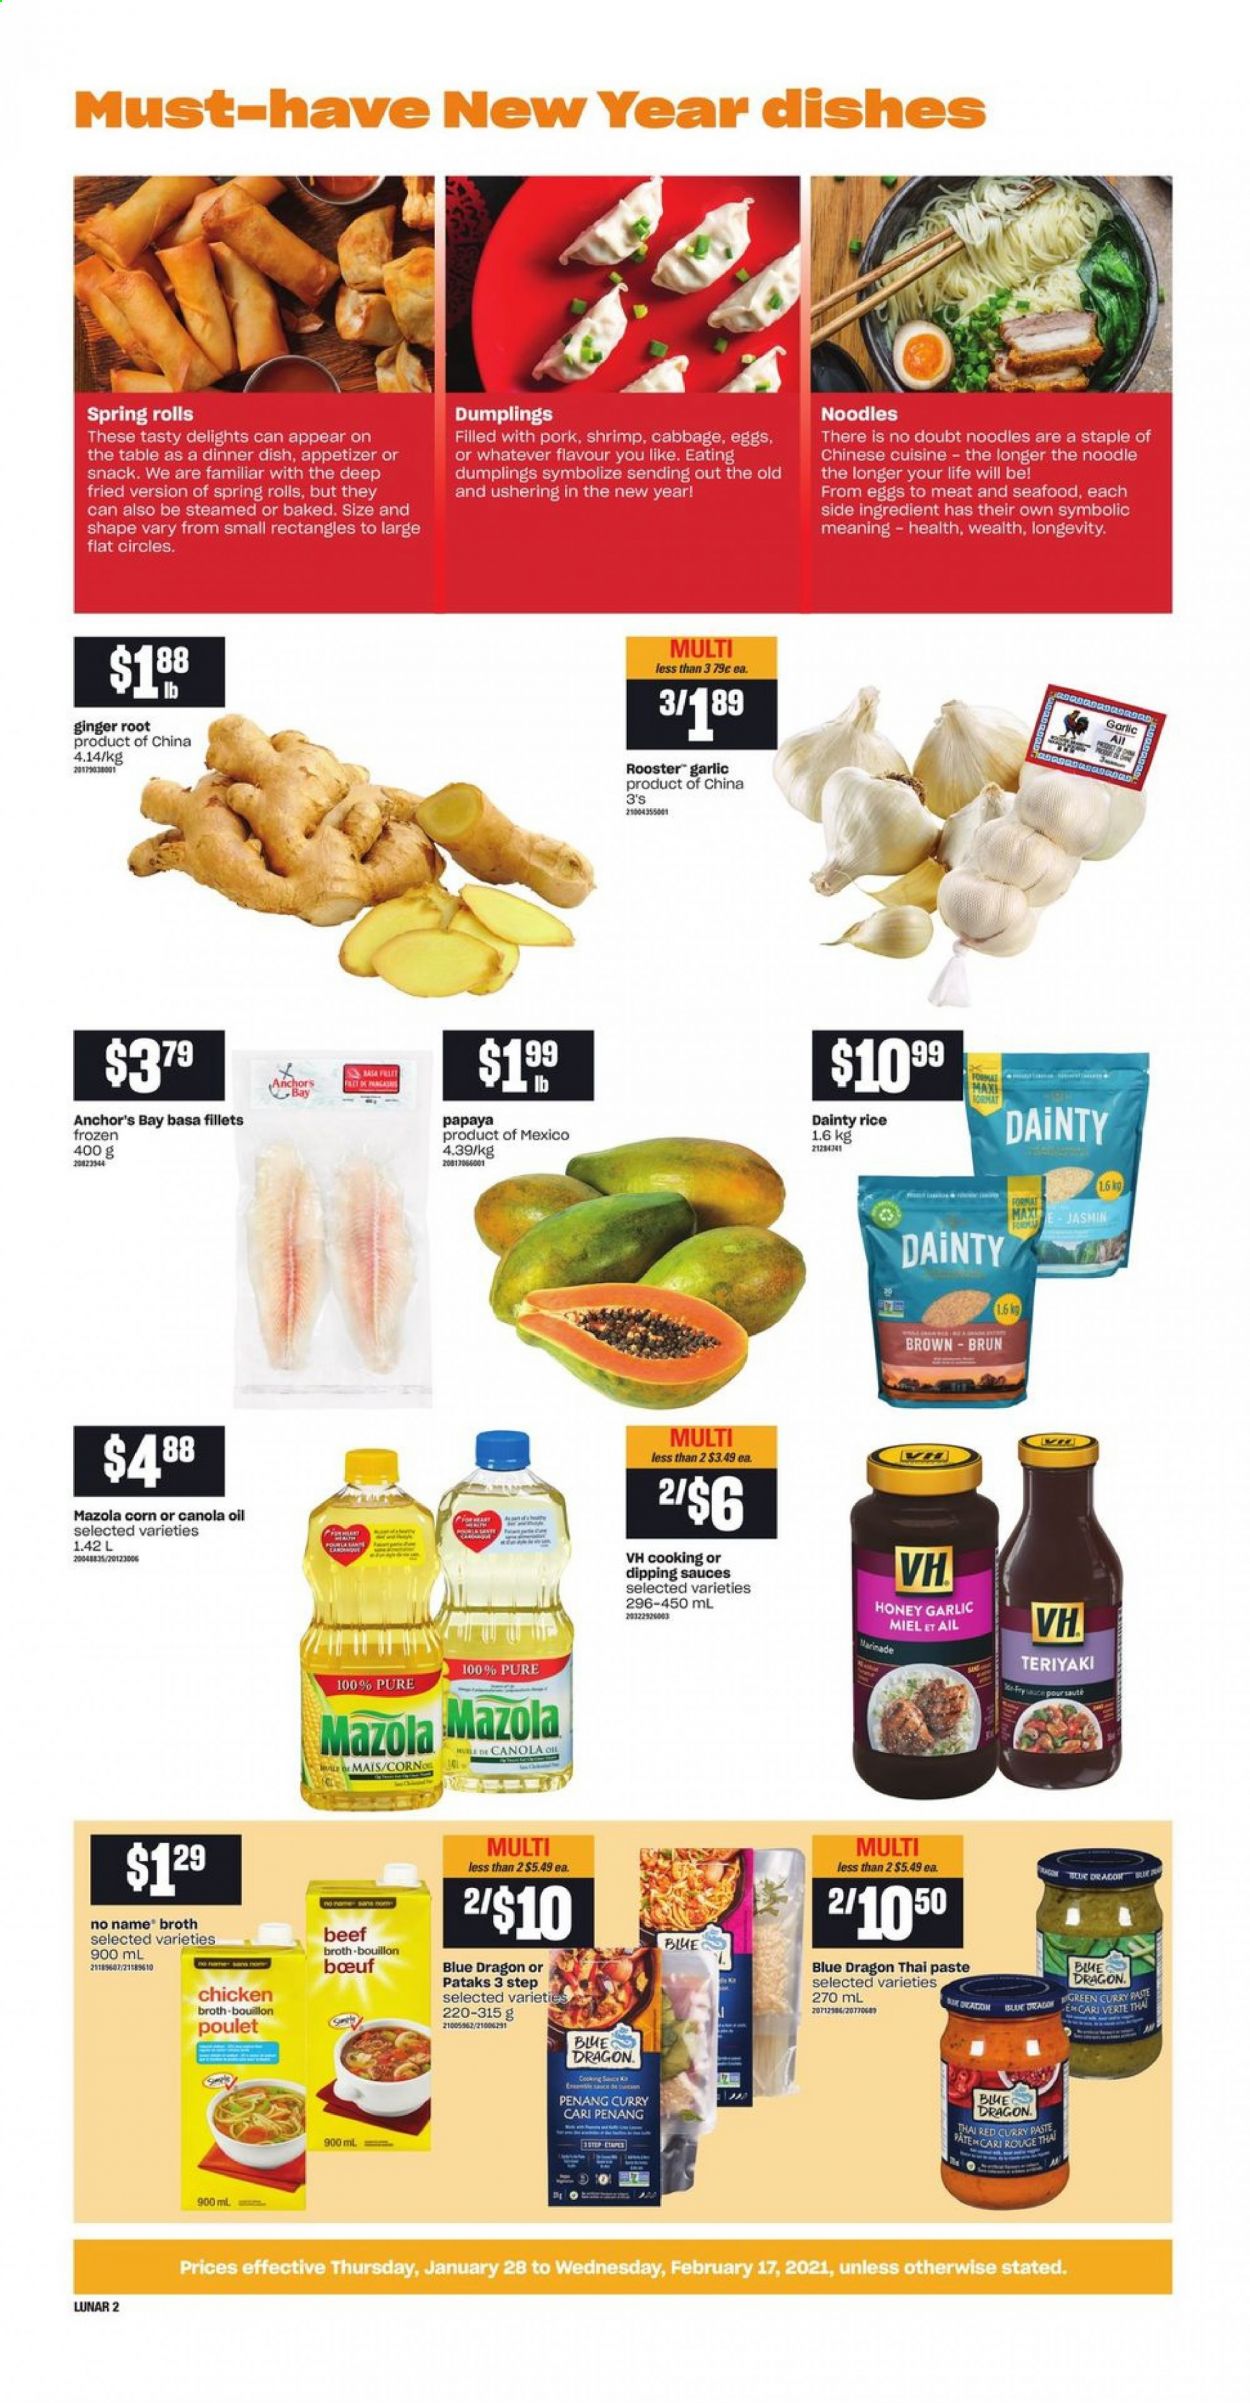 thumbnail - Atlantic Superstore Flyer - January 28, 2021 - February 17, 2021 - Sales products - garlic, ginger, seafood, shrimps, No Name, dumplings, spring rolls, noodles, red curry, eggs, Anchor, bouillon, broth, rice, curry paste, marinade, canola oil, oil, honey. Page 2.